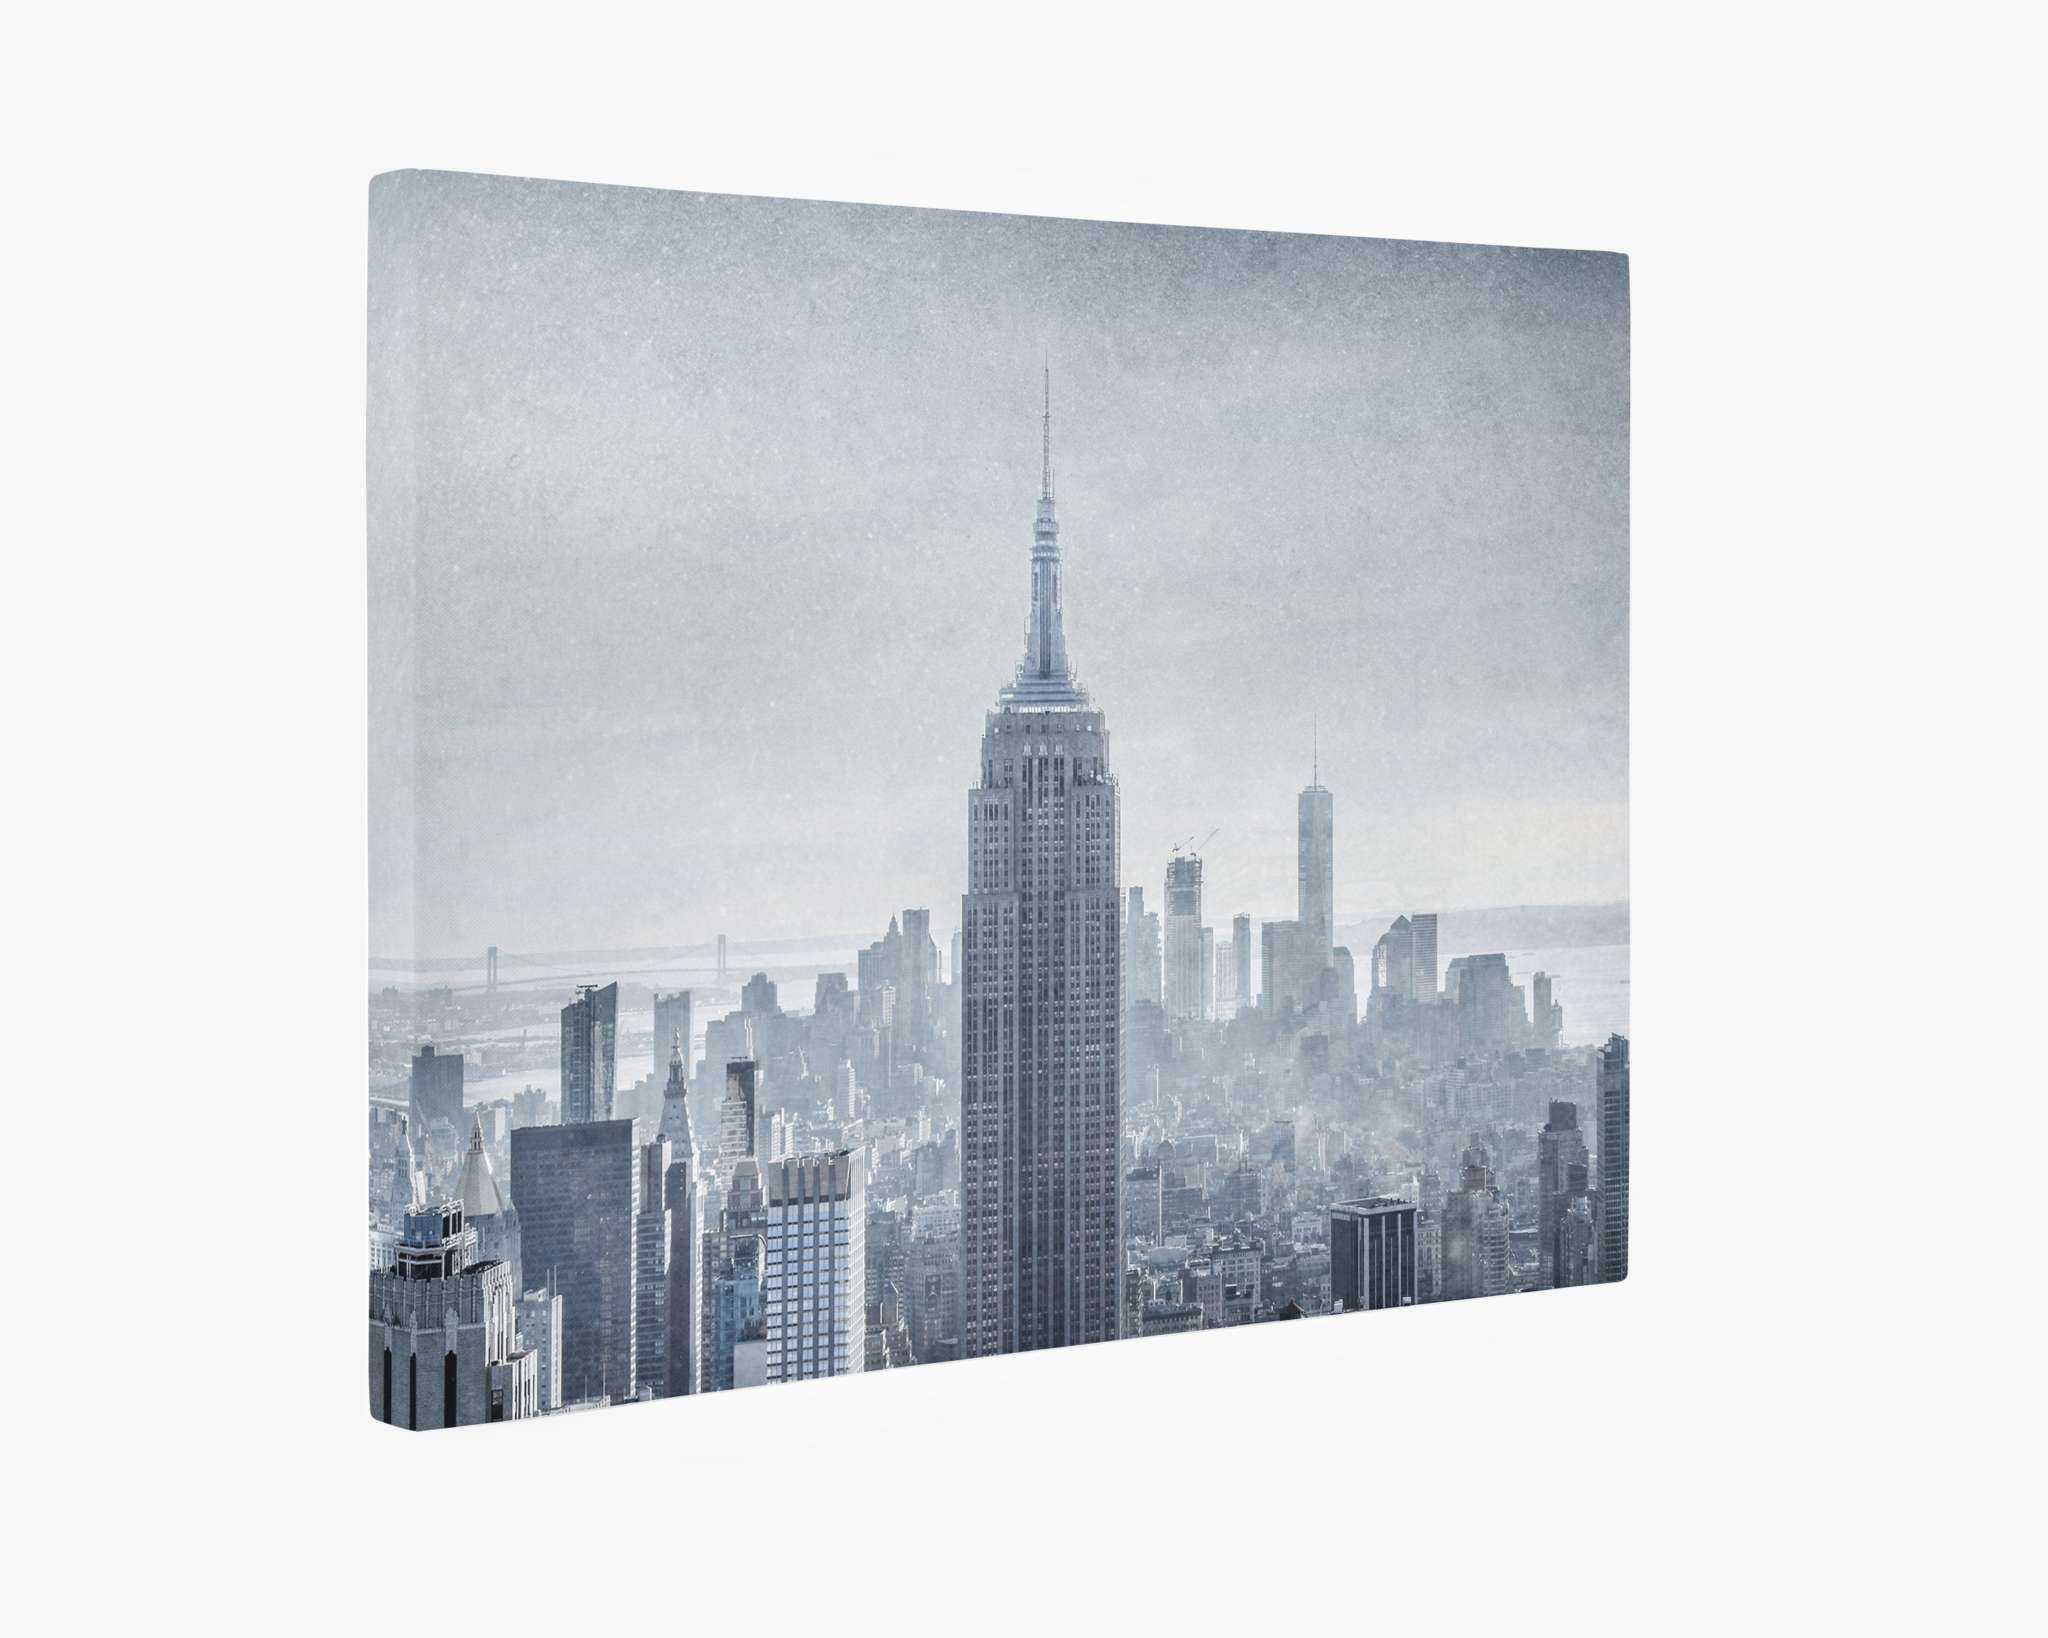 A large canvas gallery wrap showcases a grayscale image of New York City's skyline with the Empire State Building prominently centered. Misty weather lends a foggy atmosphere to the distant buildings, beautifully printed on a premium poly-cotton blend for added durability and vibrancy. The New York City Canvas Wall Art, 'Winter Metropolis' by Offley Green captures this mesmerizing scene perfectly.